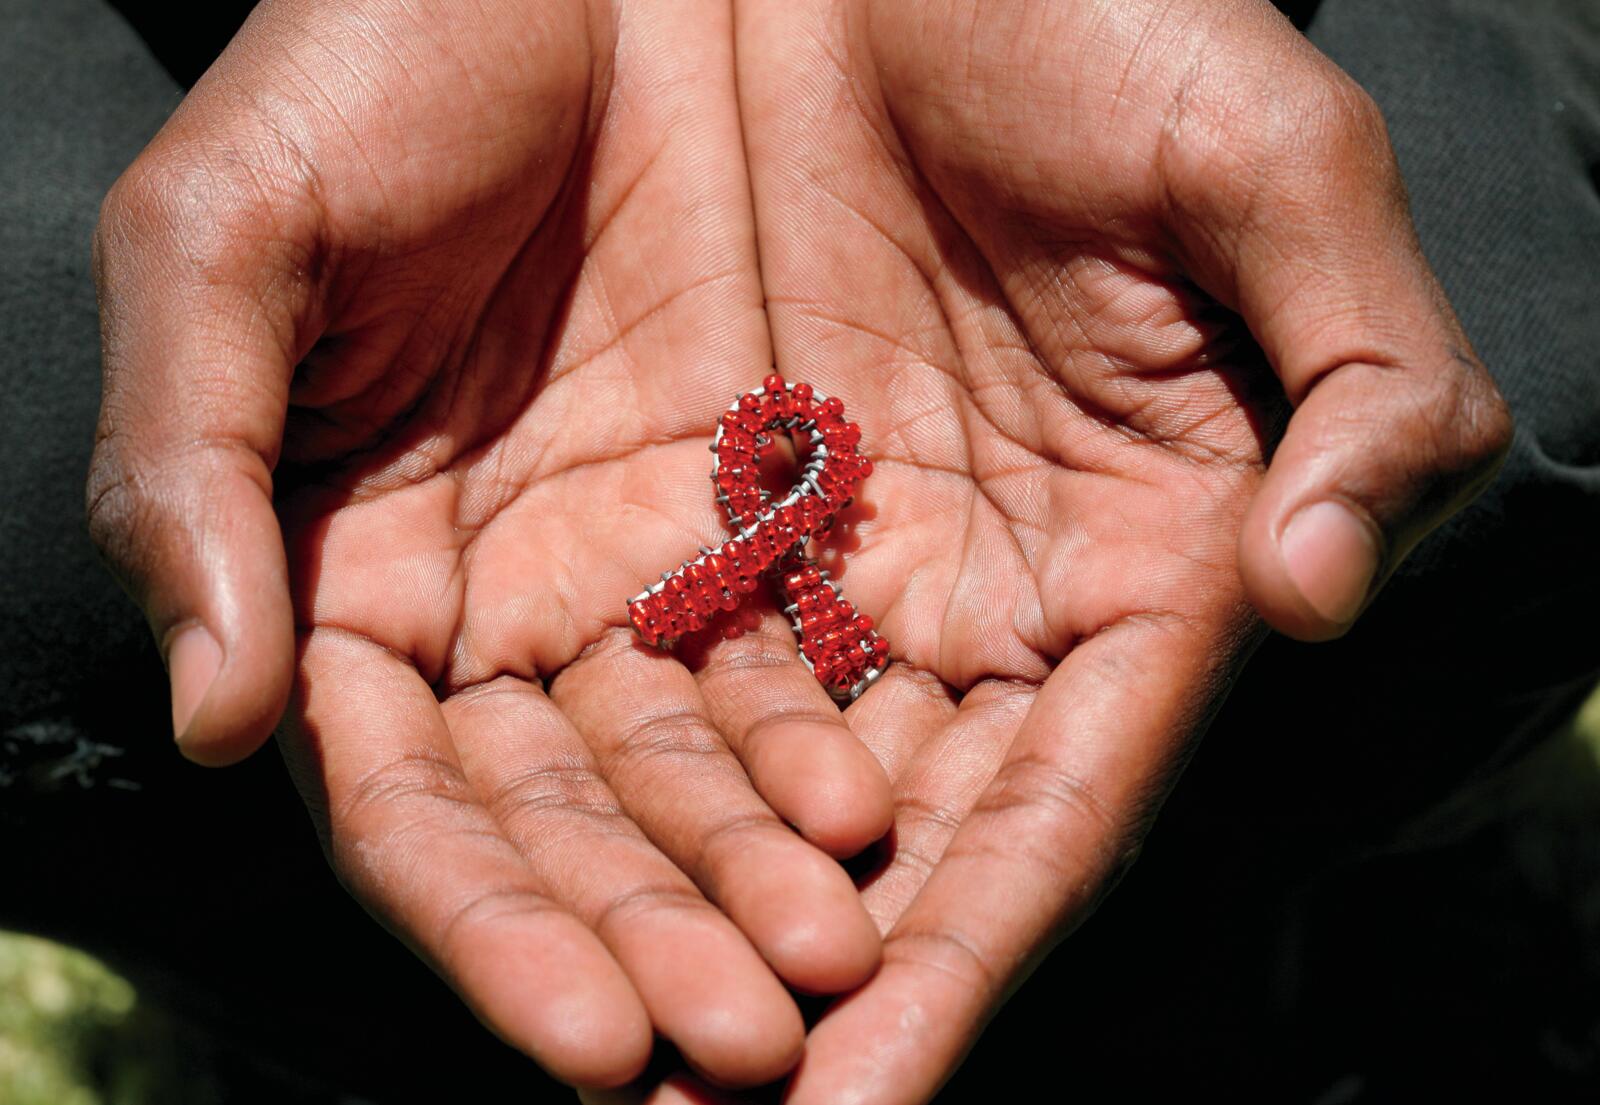 Knowledge Is Power: What Black People Need To Know About HIV/AIDS Right Now